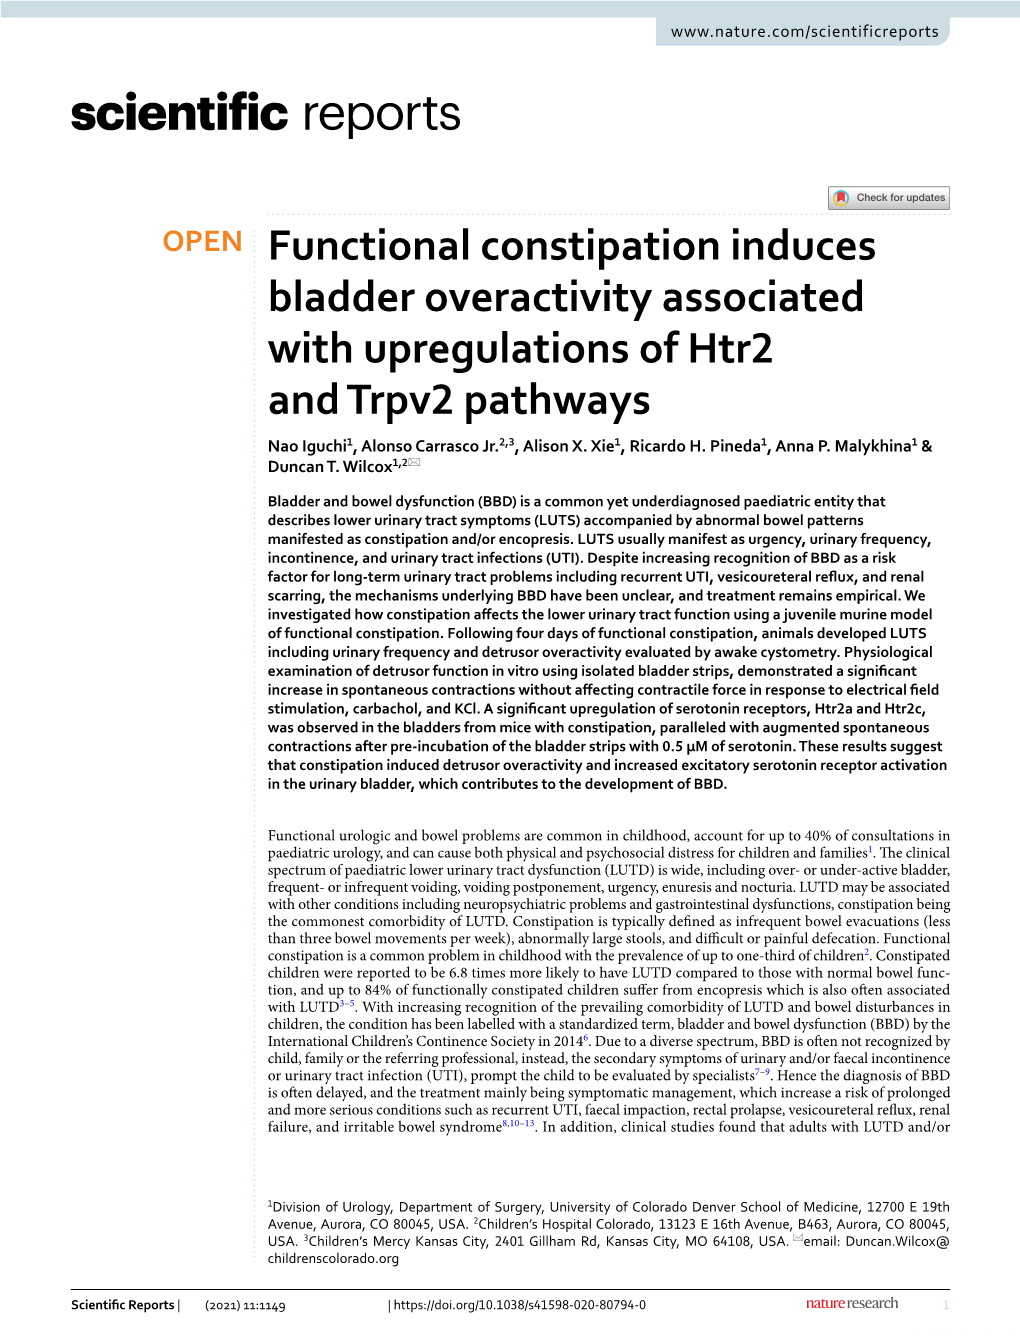 Functional Constipation Induces Bladder Overactivity Associated with Upregulations of Htr2 and Trpv2 Pathways Nao Iguchi1, Alonso Carrasco Jr.2,3, Alison X